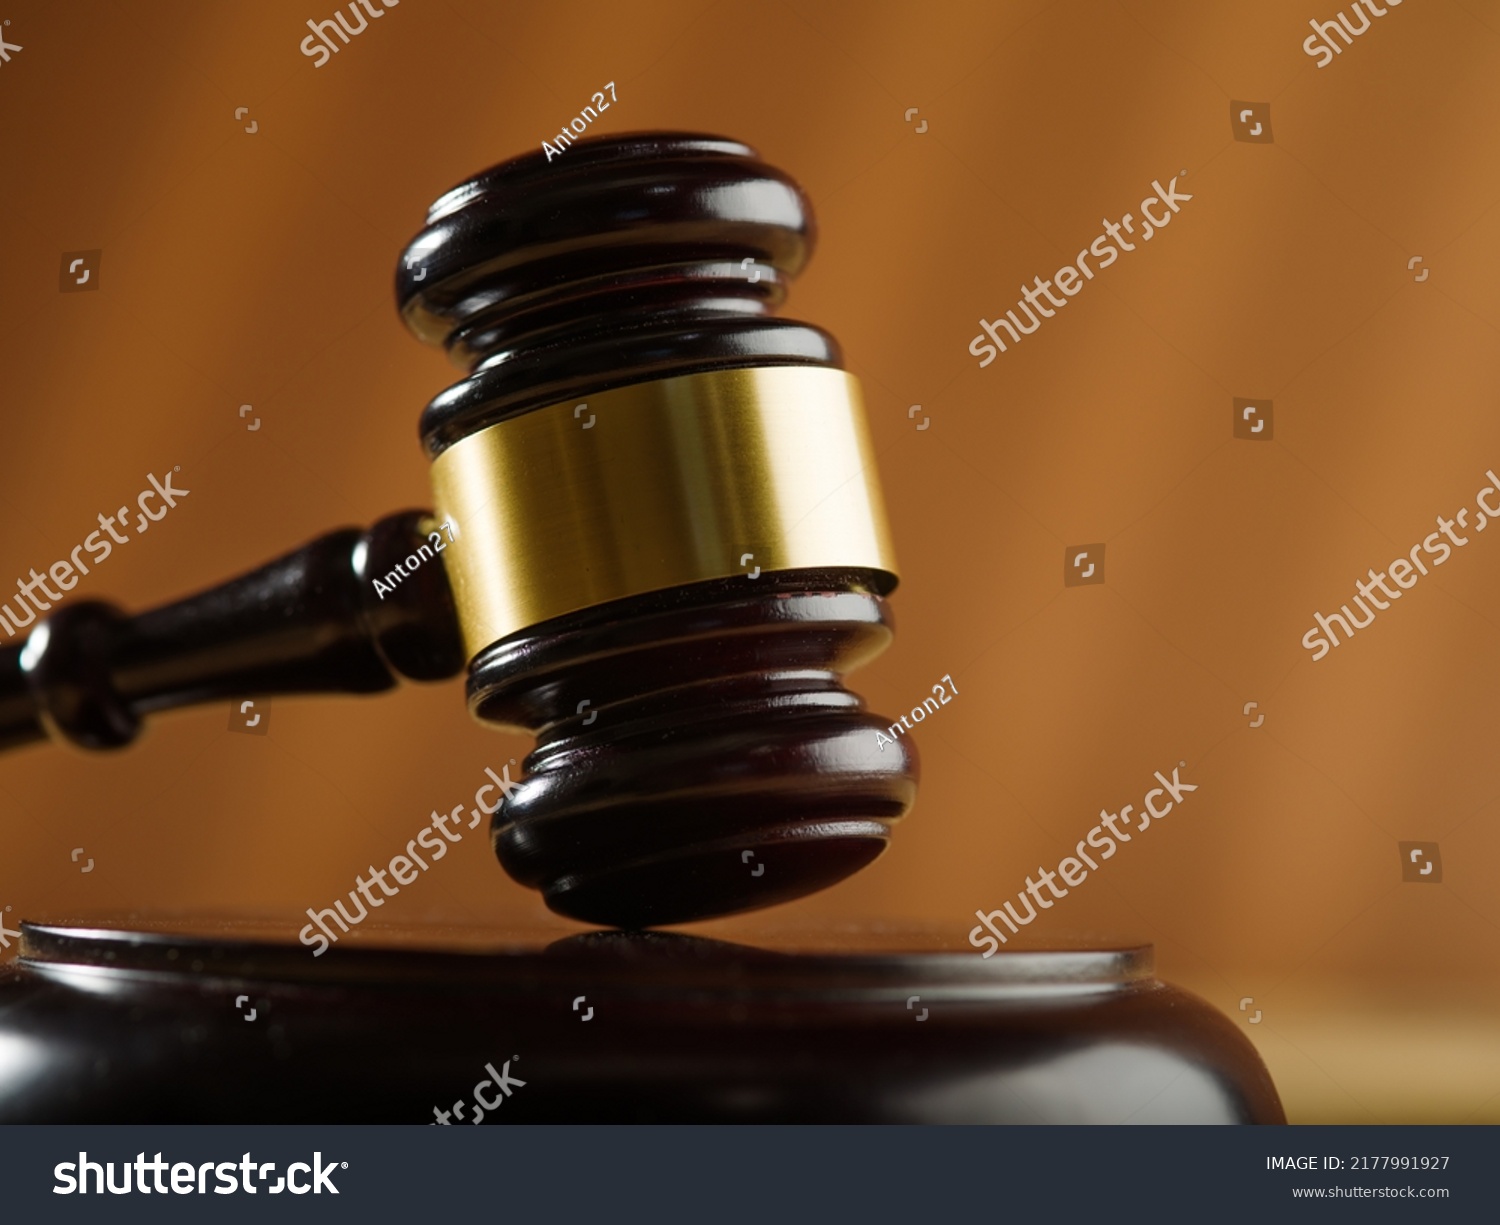 Close-up. Wooden judge's gavel on a beige background. Court, justice, presumption of innocence, Constitution, rule of law, auction. Banner, poster. There is no one in the photo. #2177991927